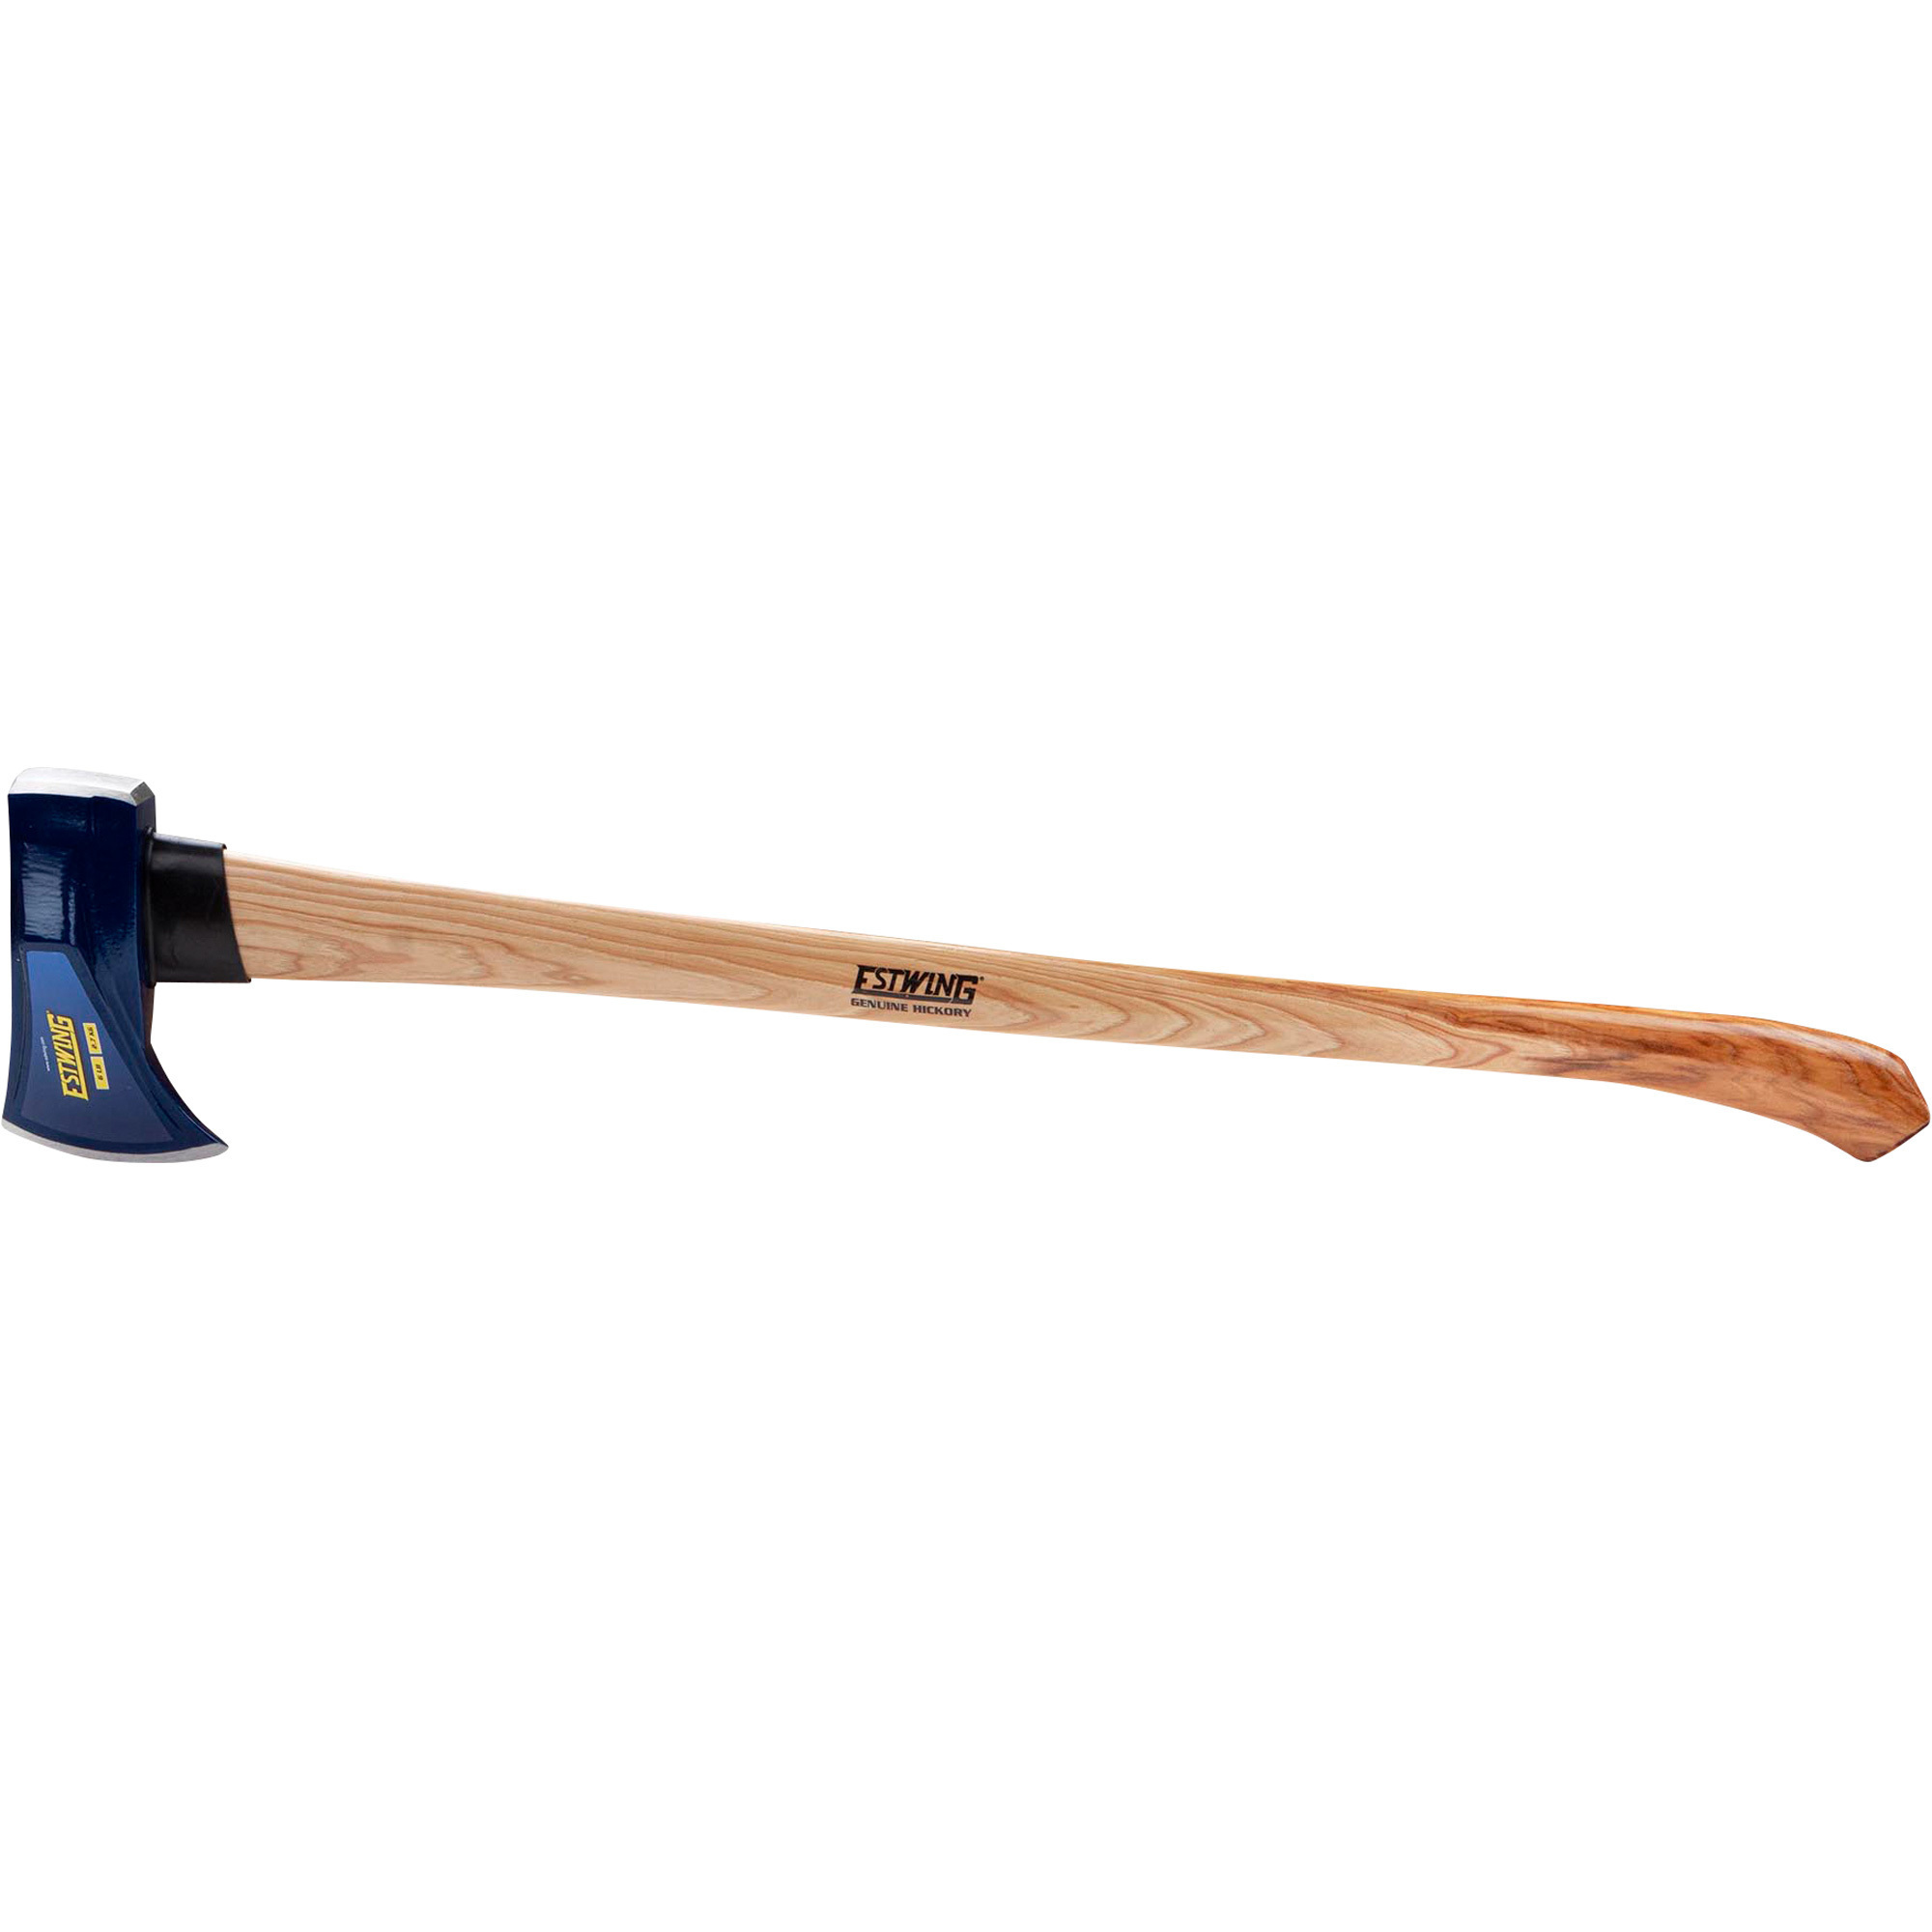 Estwing Splitting Maul with Hickory Wood Handle, 6-Lb., 36Inch, Model EML-636W